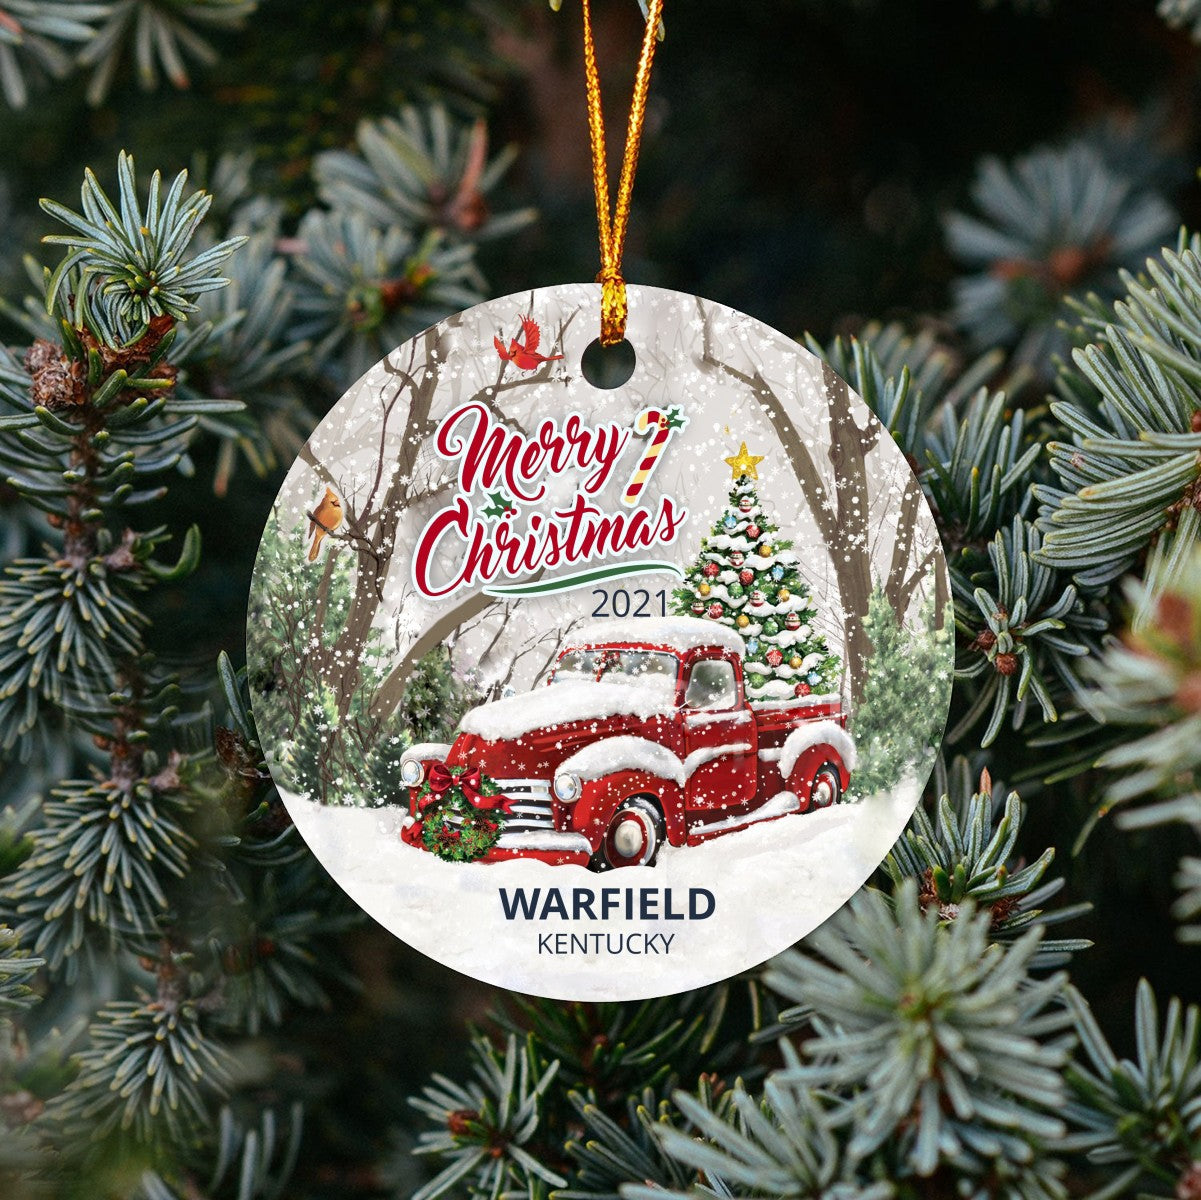 Christmas Tree Ornaments Warfield - Ornament With Name City, State Warfield Kentucky KY Ornament - Red Truck Xmas Ornaments 3'' Plastic Gift For Family, Friend And Housewarming